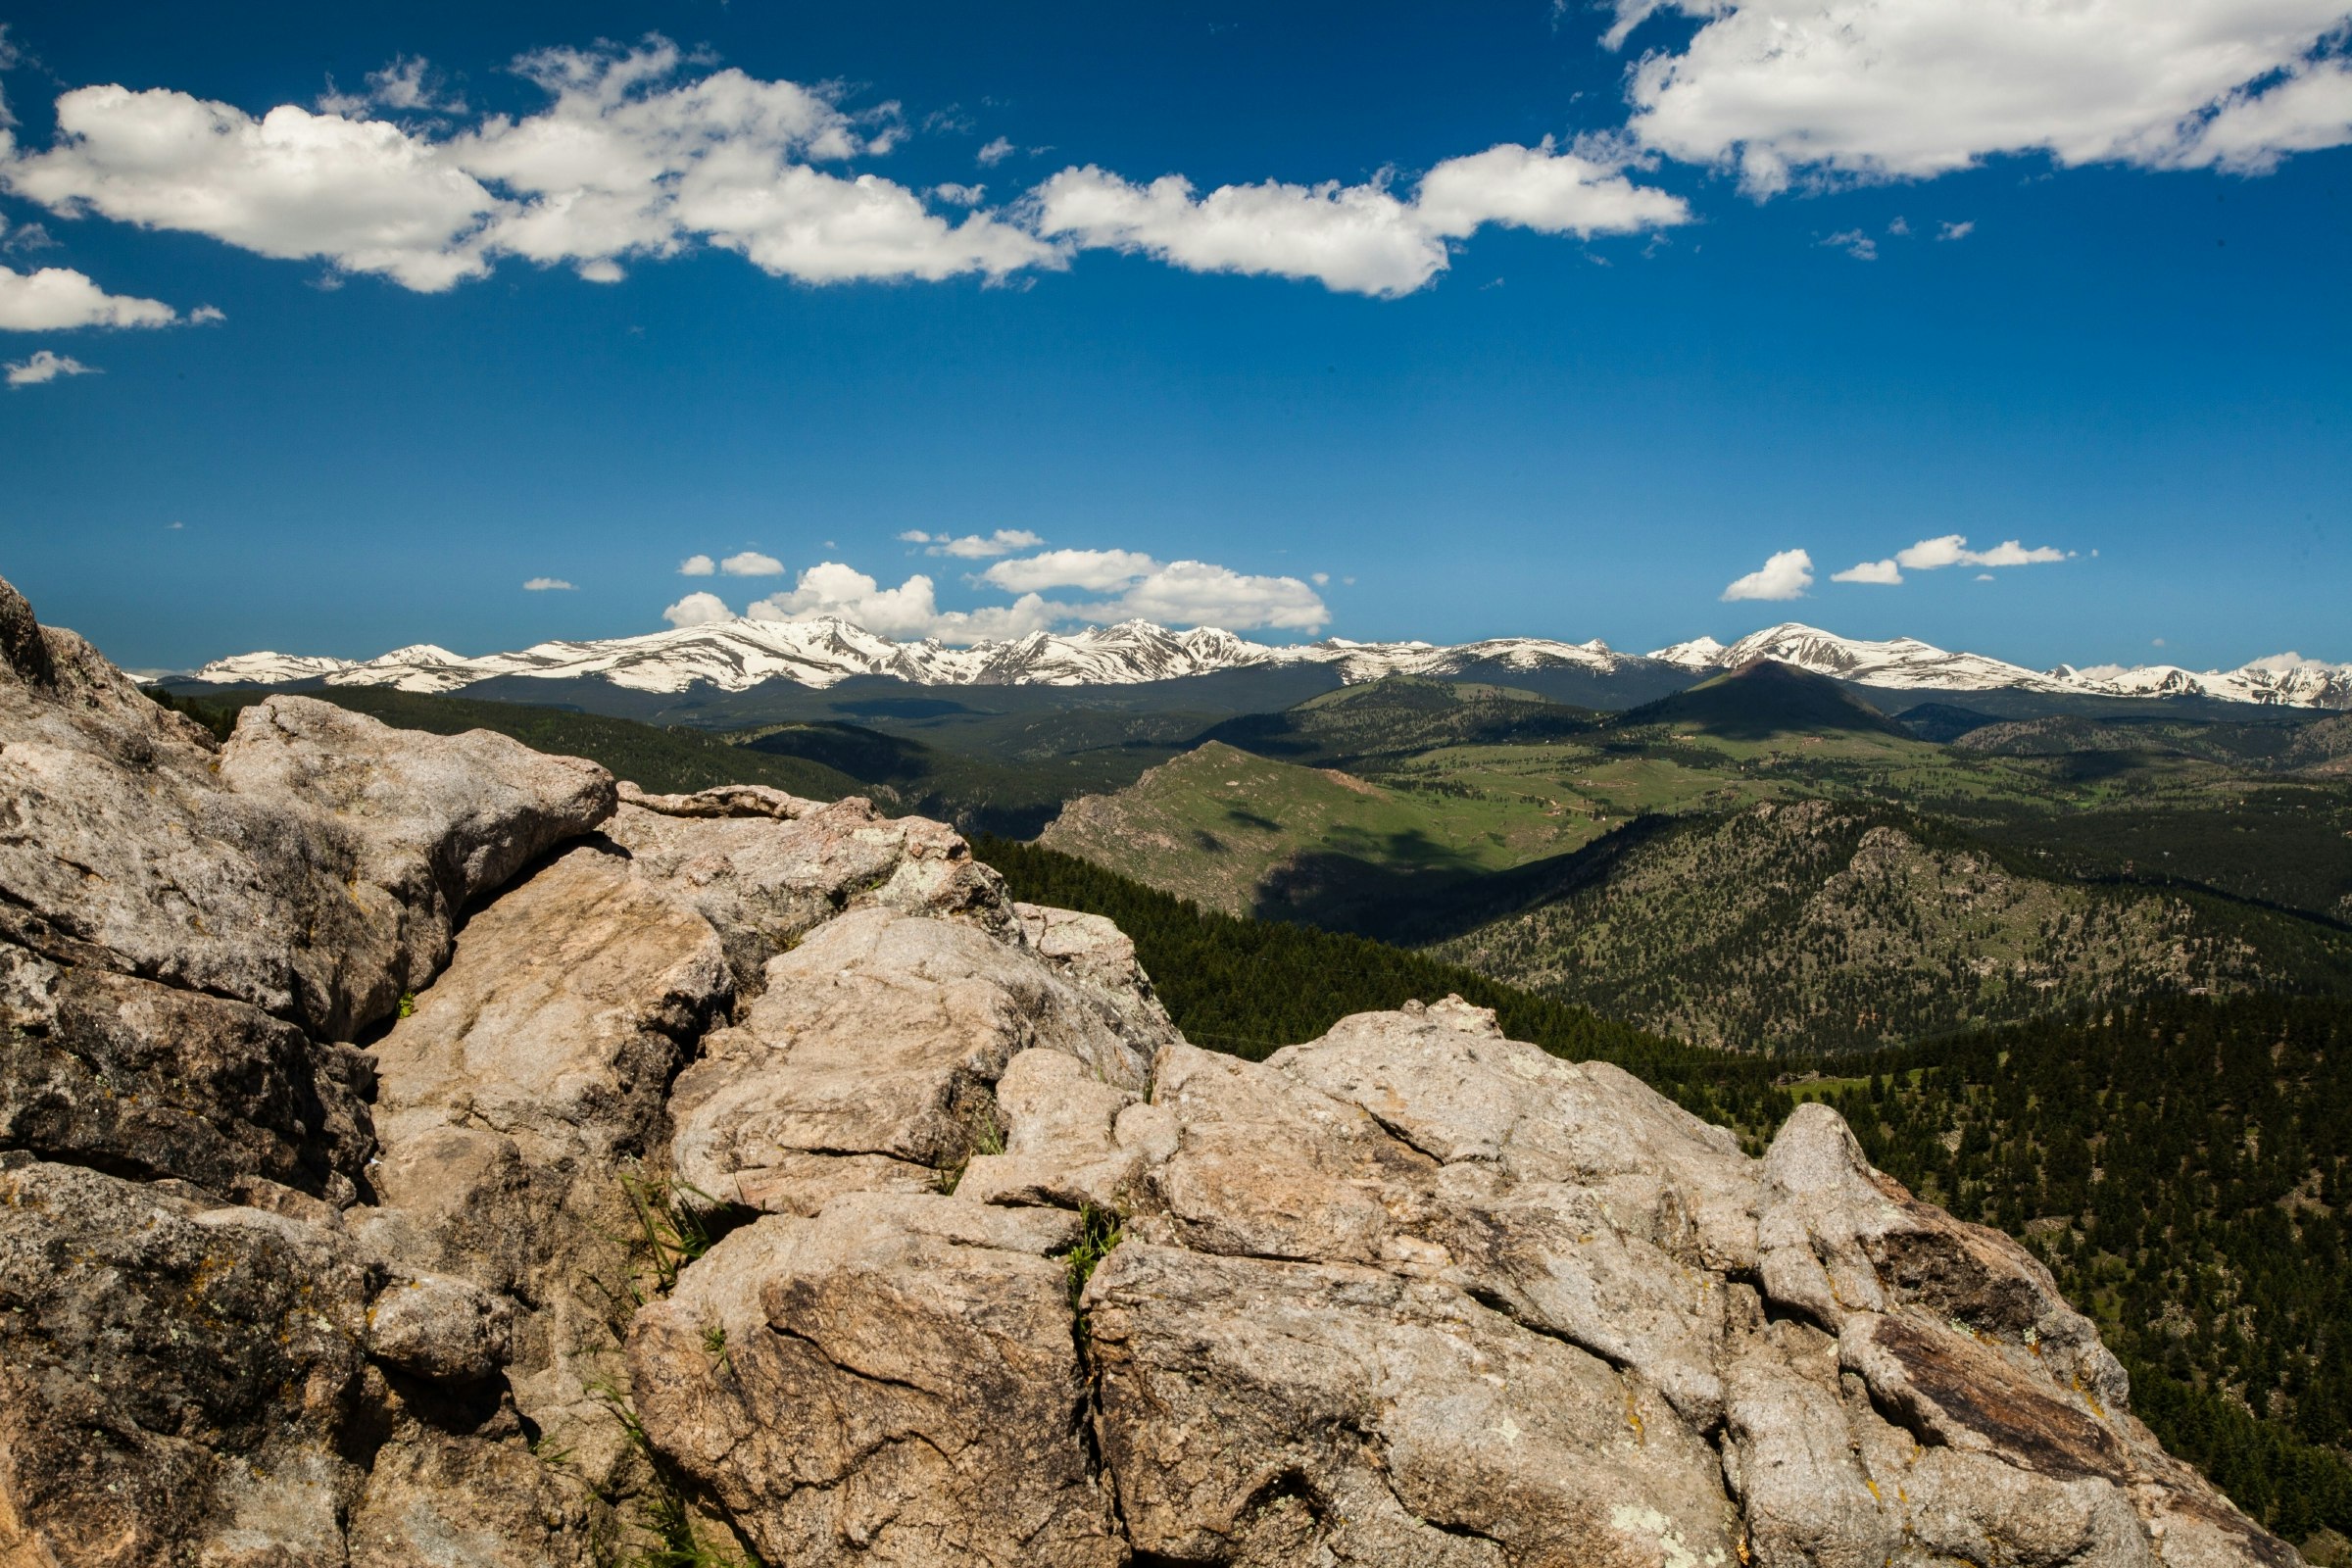 The continental divide, as seen from Flagstaff Mountain outside of Boulder, Colorado